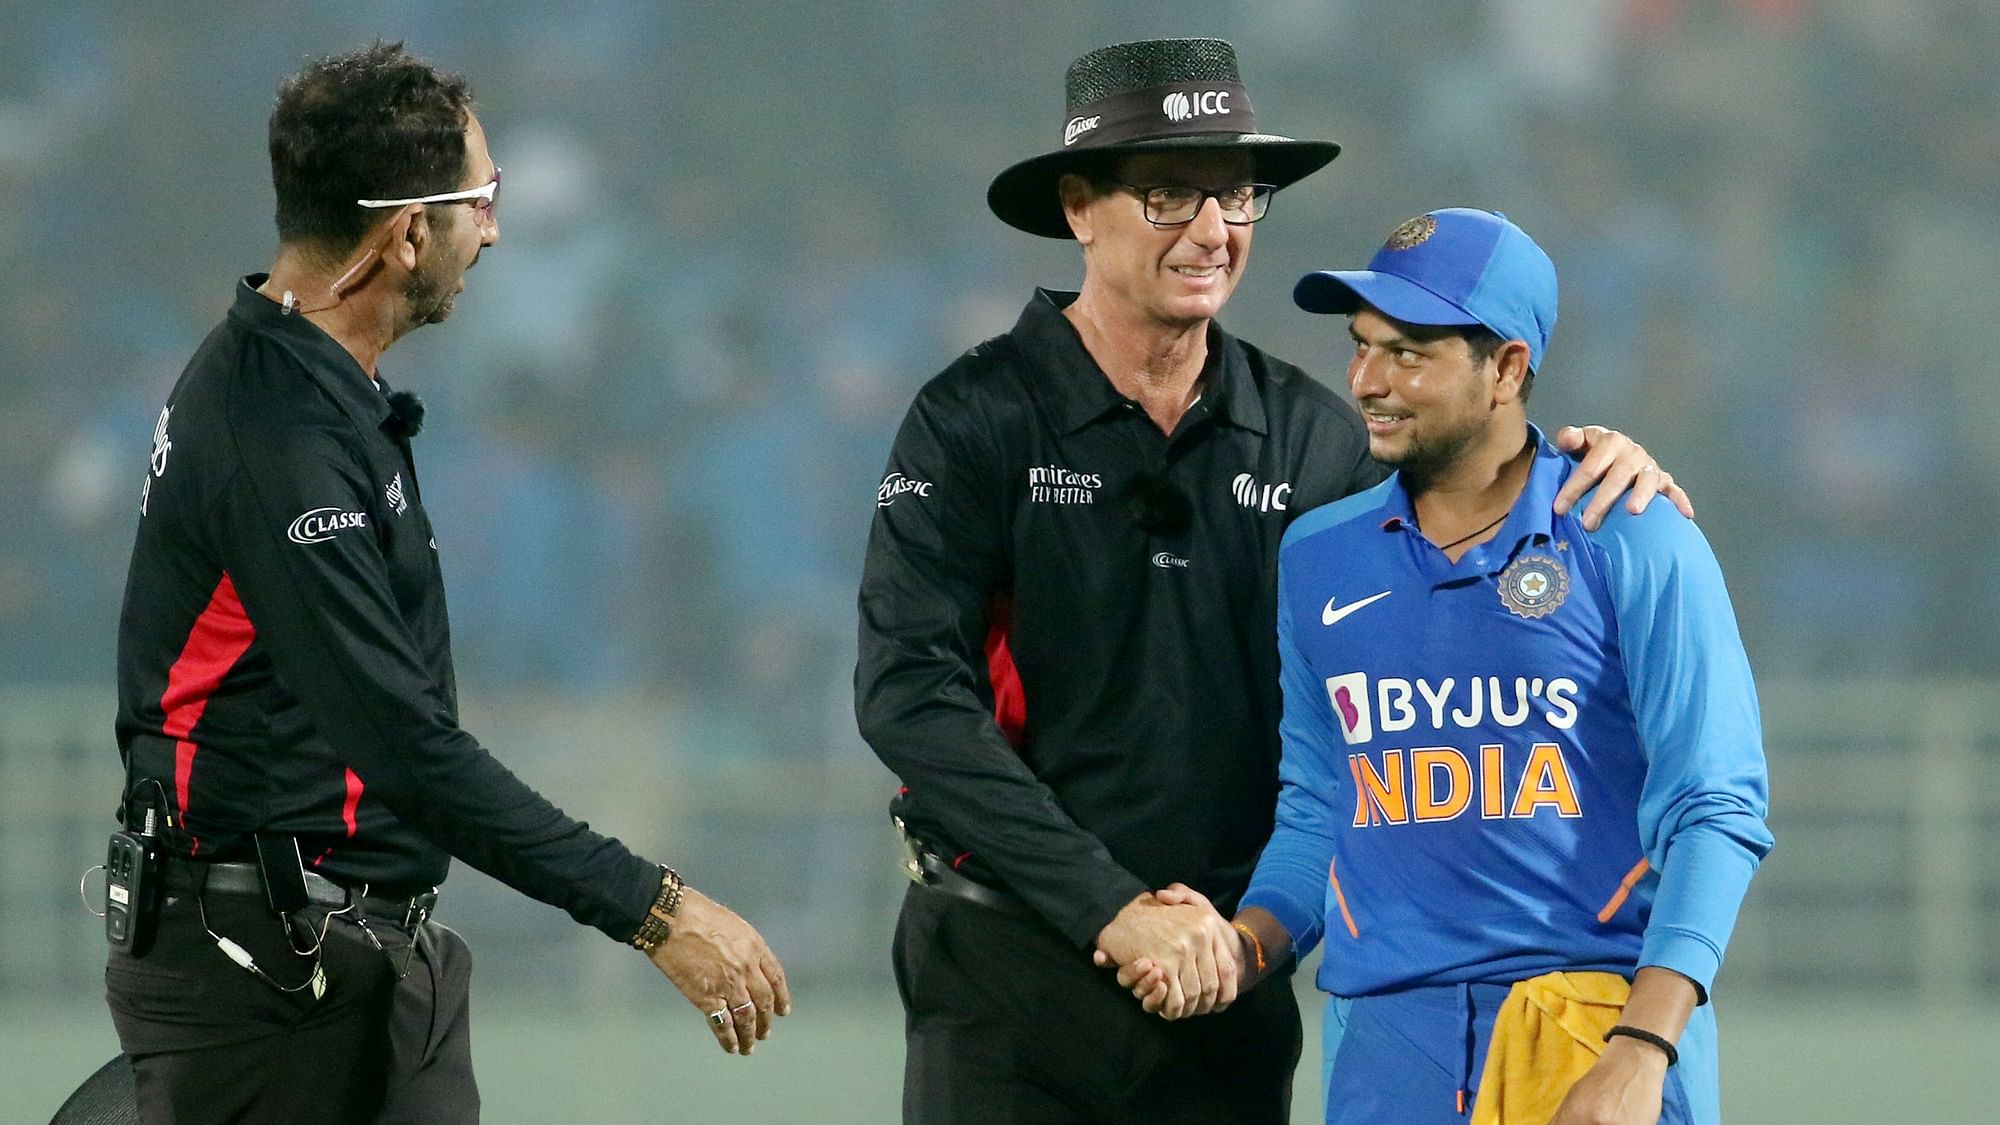 Umpires shake hands with Kuldeep Yadav of India after the 2nd ODI between India and the West Indies. Kuldeep claimed his career’s second hat-trick in the match.